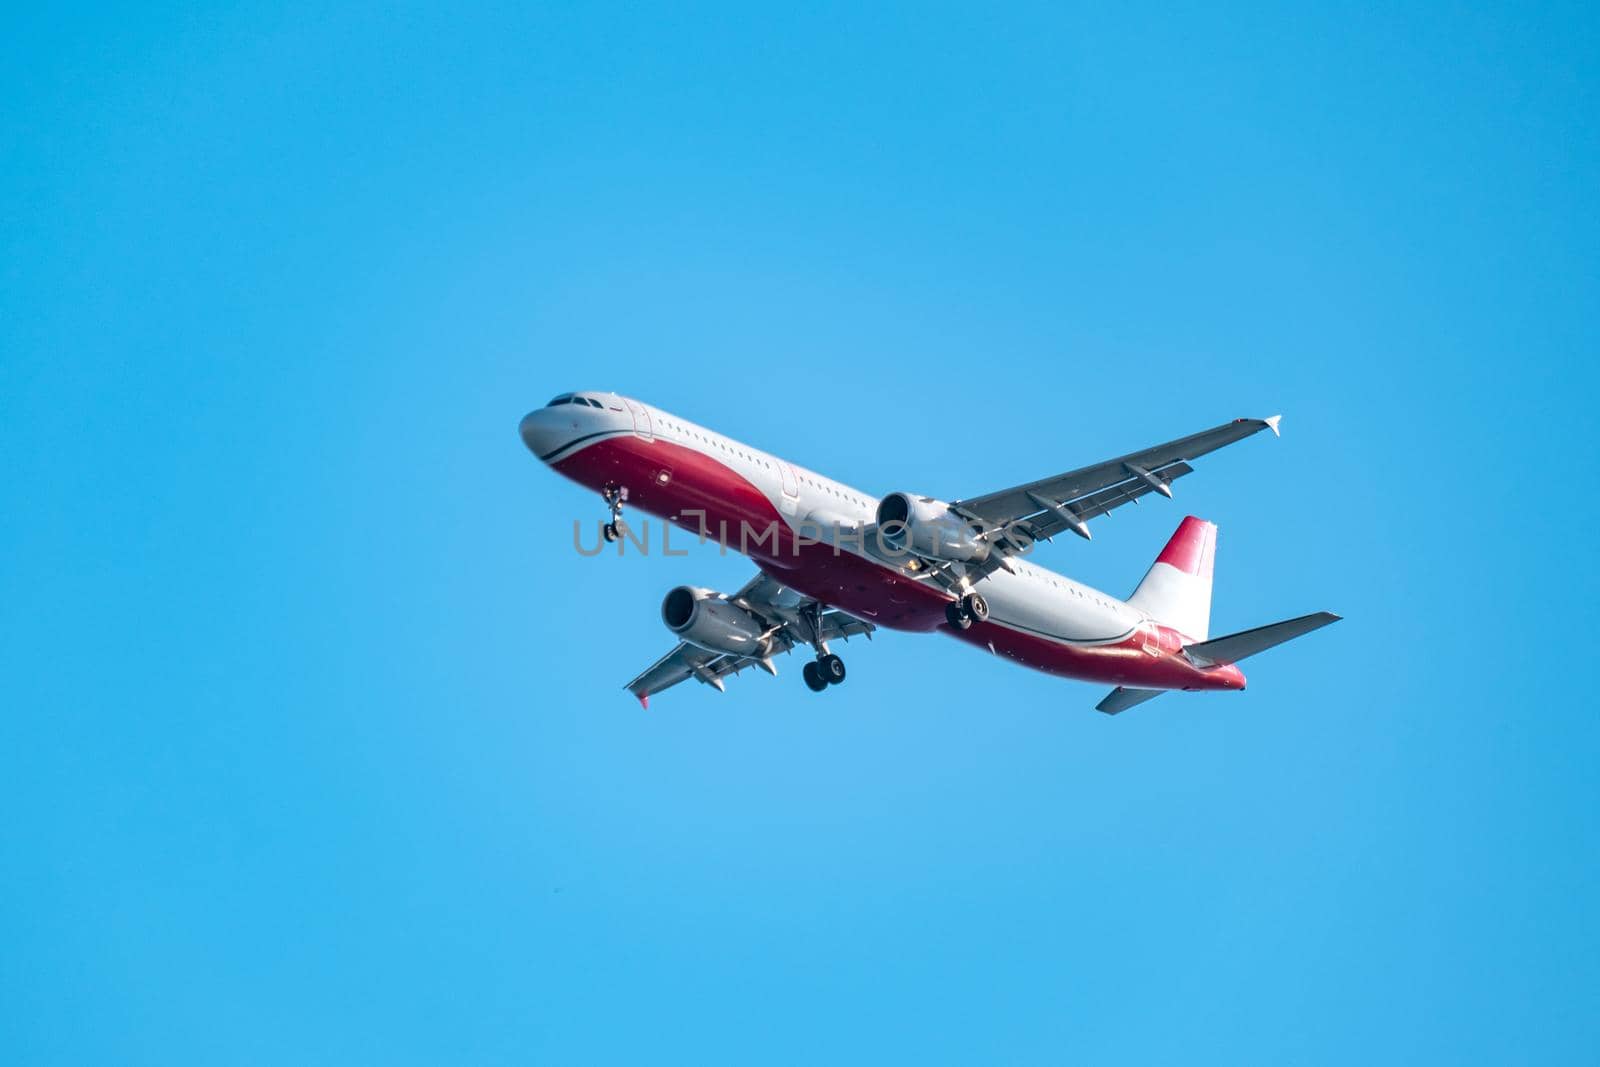 Commercial airplane flying high in clear blue sky